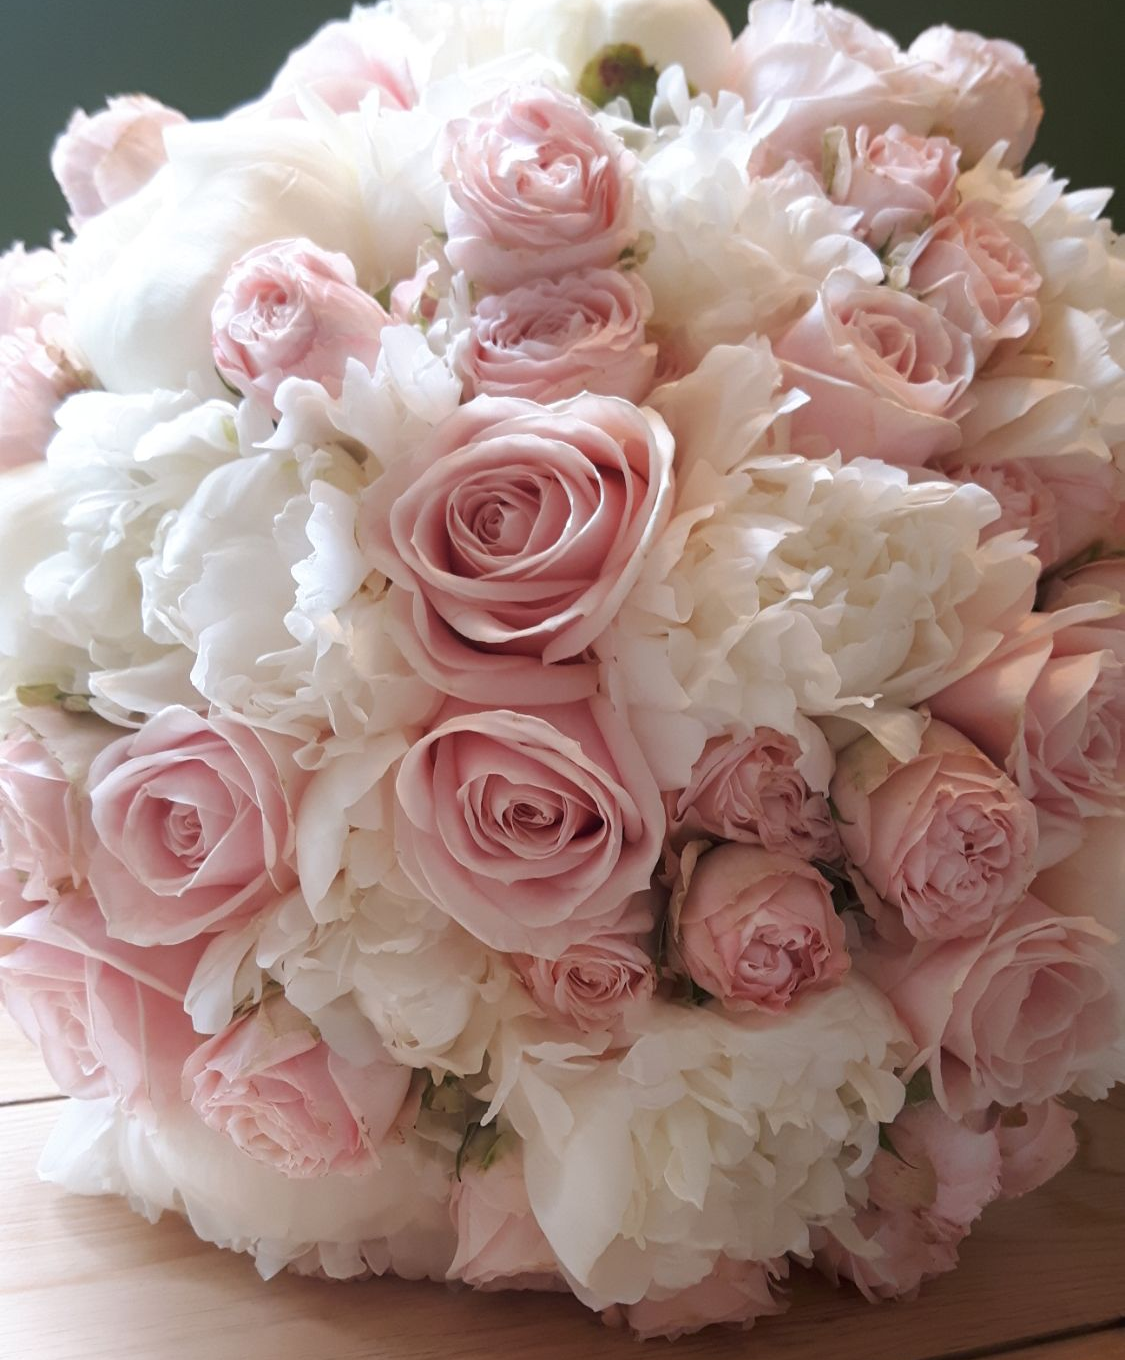 bouquet of roses and peonies